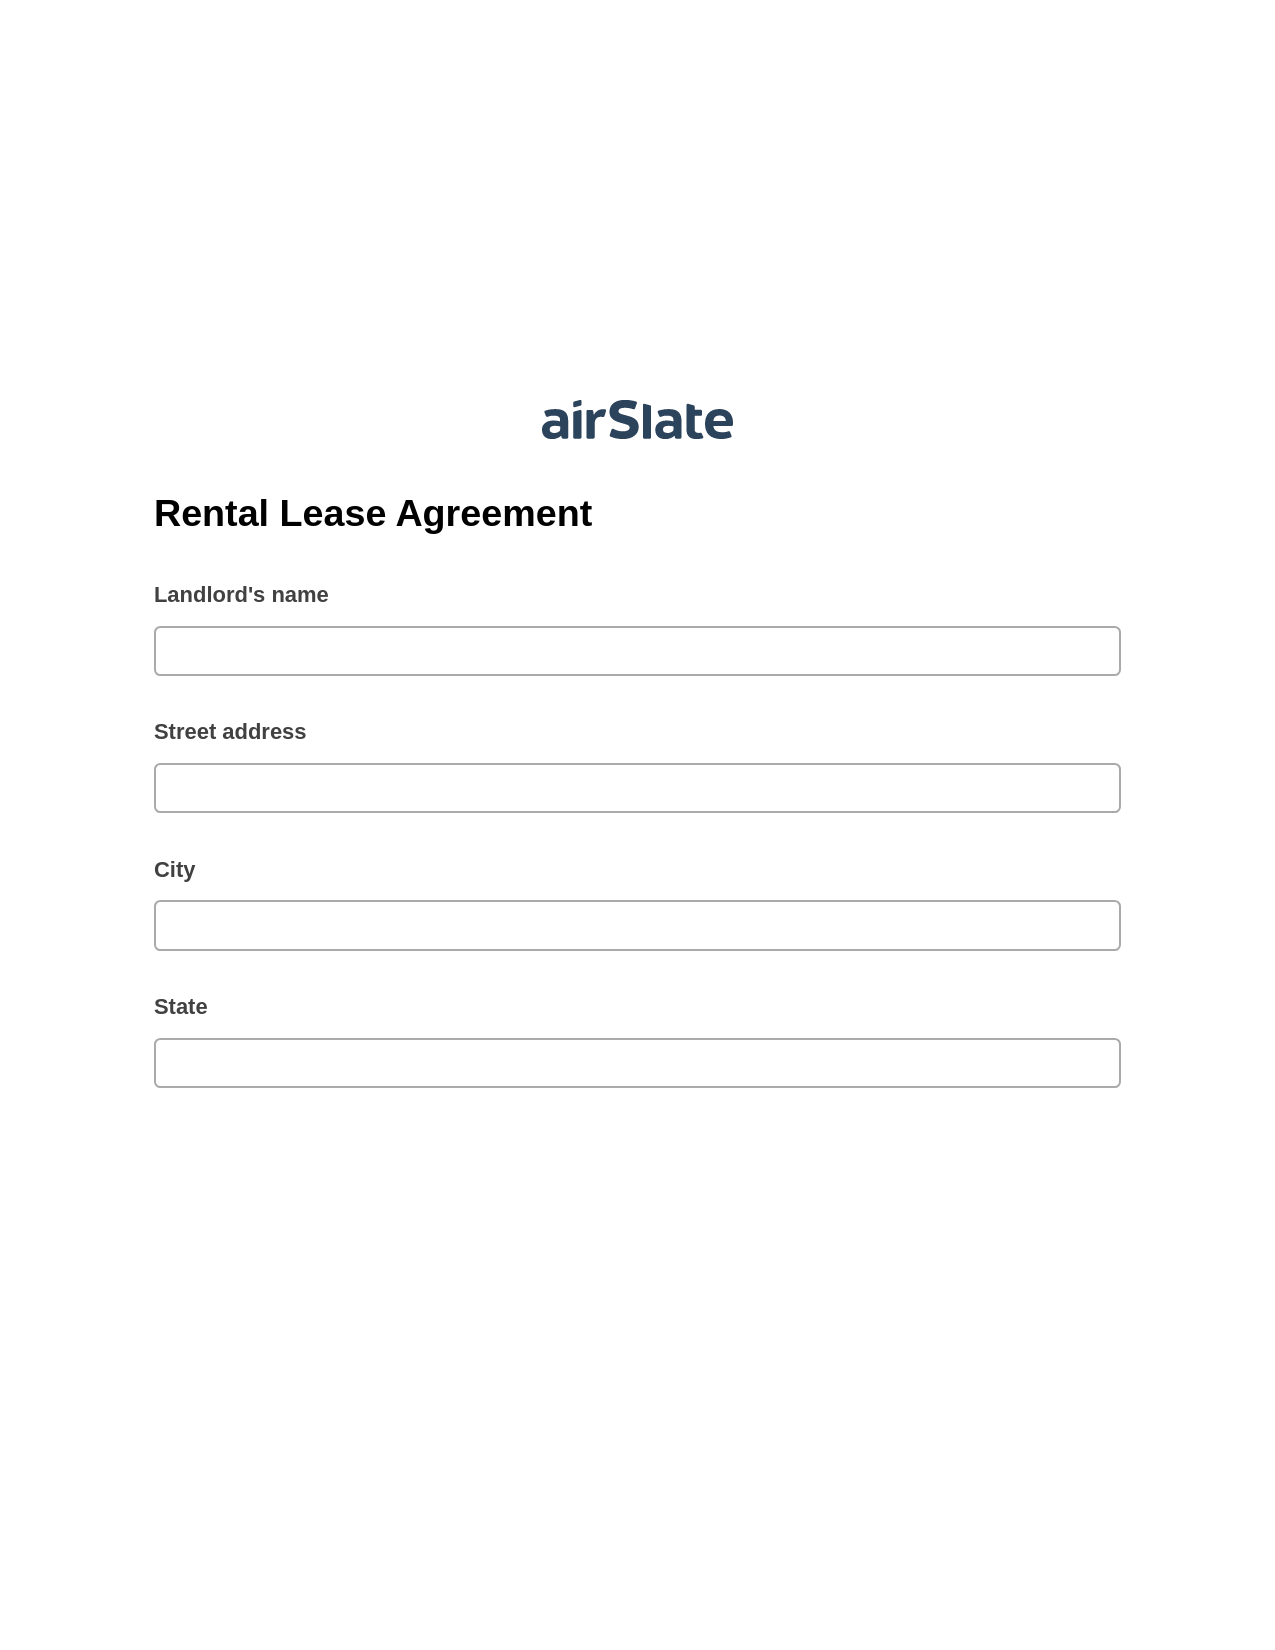 Rental Lease Agreement Pre-fill from NetSuite Records Bot, Create NetSuite Records Bot, Archive to SharePoint Folder Bot